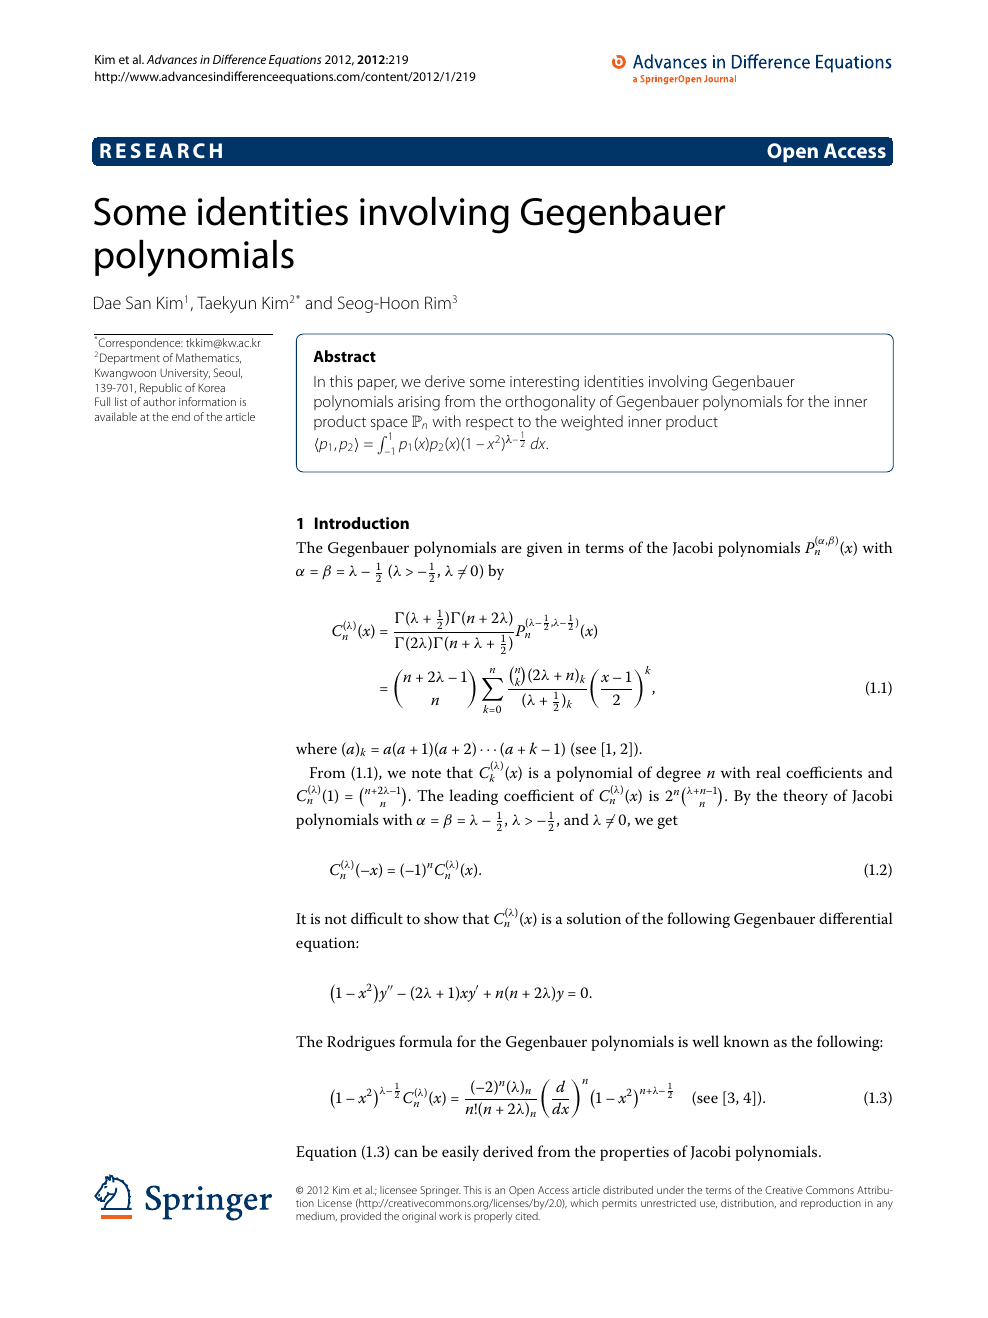 Some Identities Involving Gegenbauer Polynomials Topic Of Research Paper In Mathematics Download Scholarly Article Pdf And Read For Free On Cyberleninka Open Science Hub